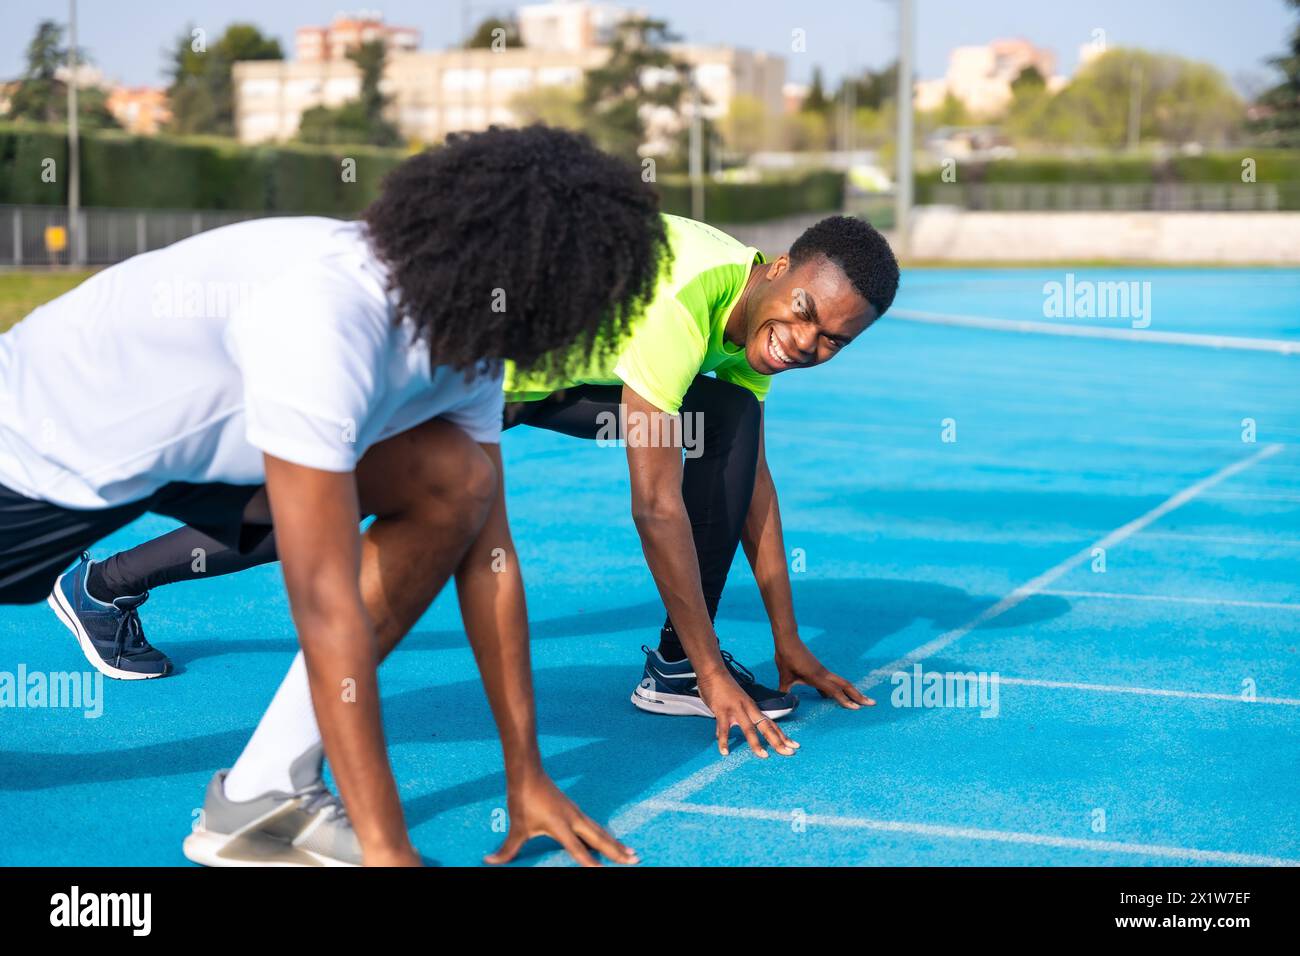 African athletes in starting position to begin running on an athletics track Stock Photo